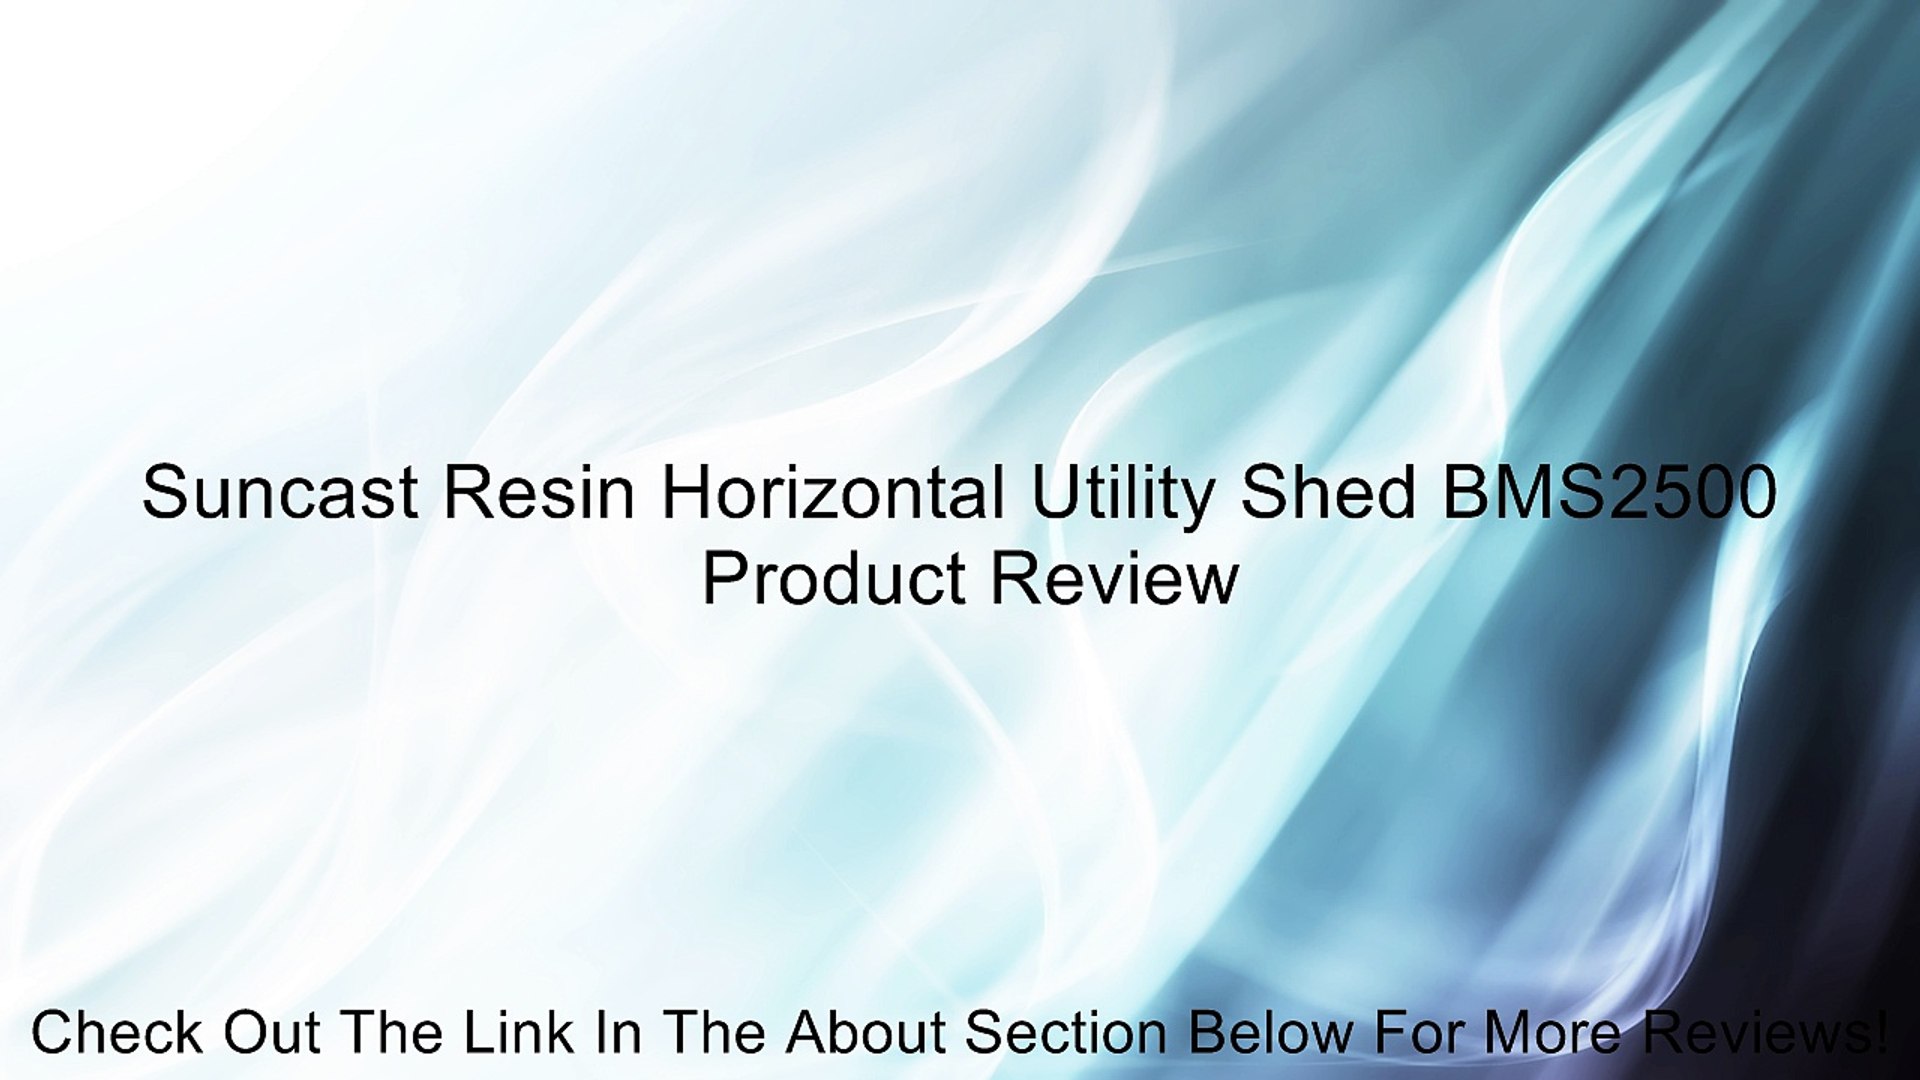 Suncast Resin Horizontal Utility Shed Bms2500 Review Video